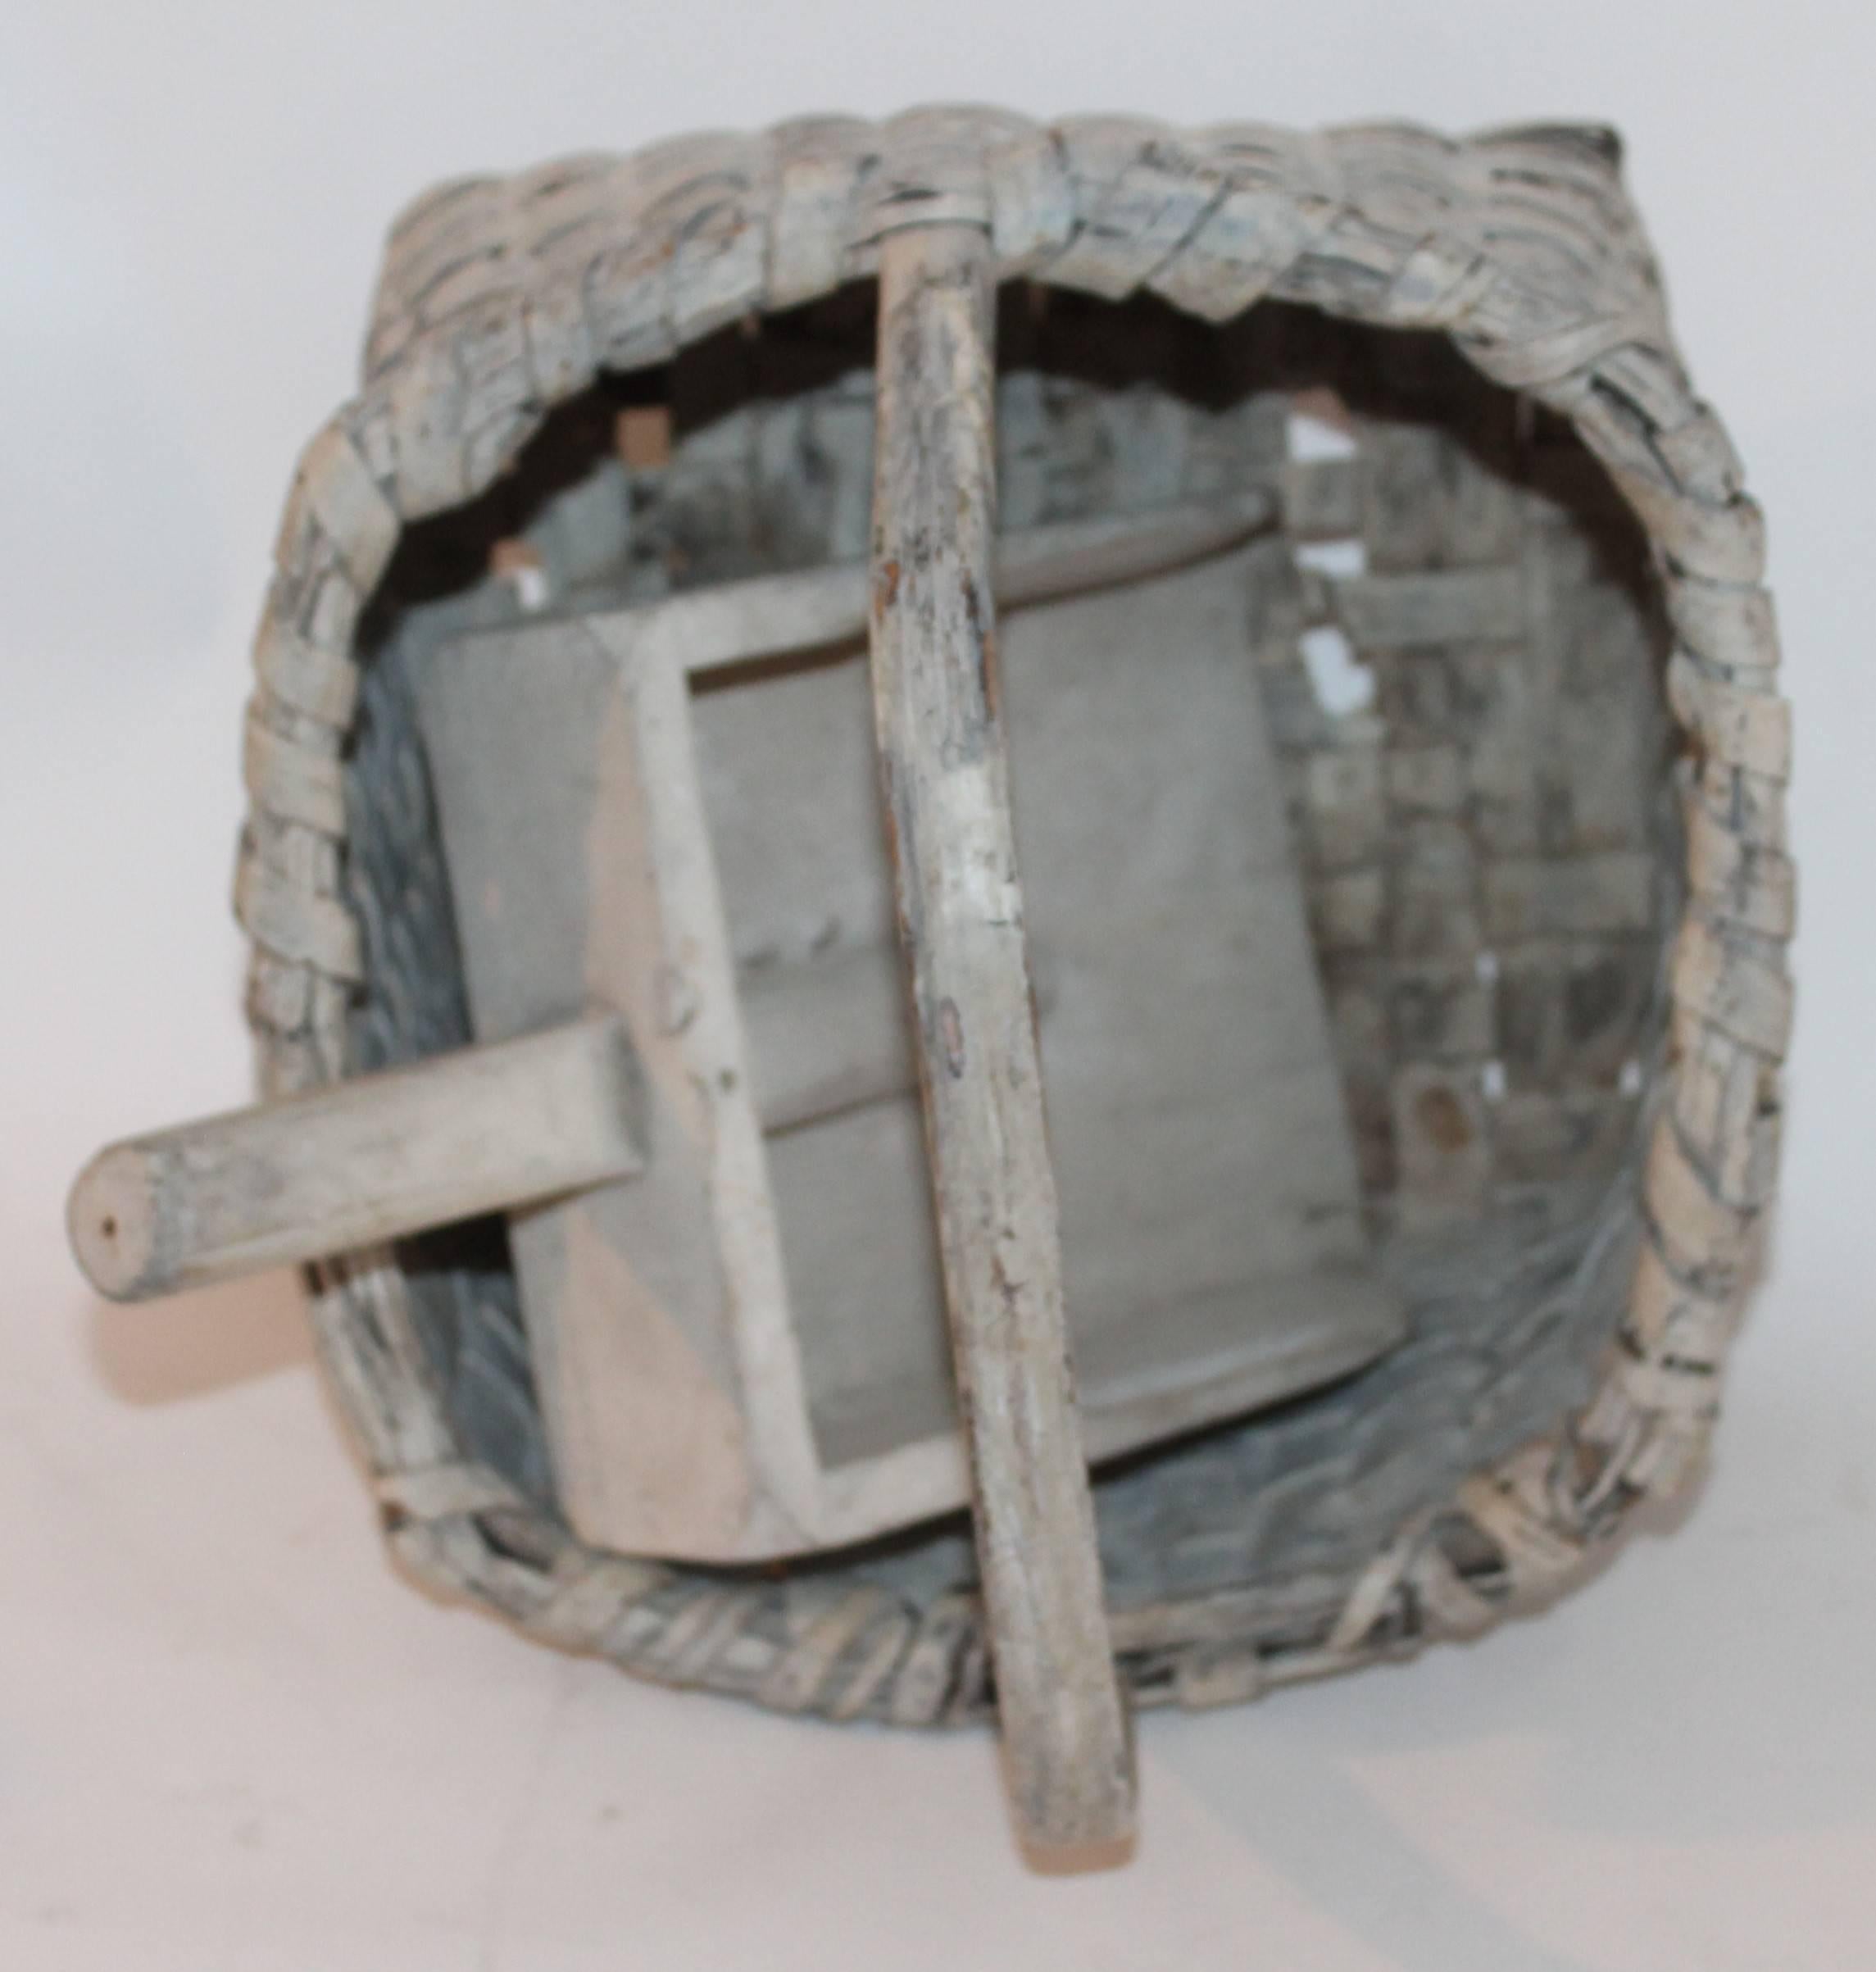 This rustic handmade original white painted basket is in good condition as found with the handmade original white painted wood scoop. Sold together.